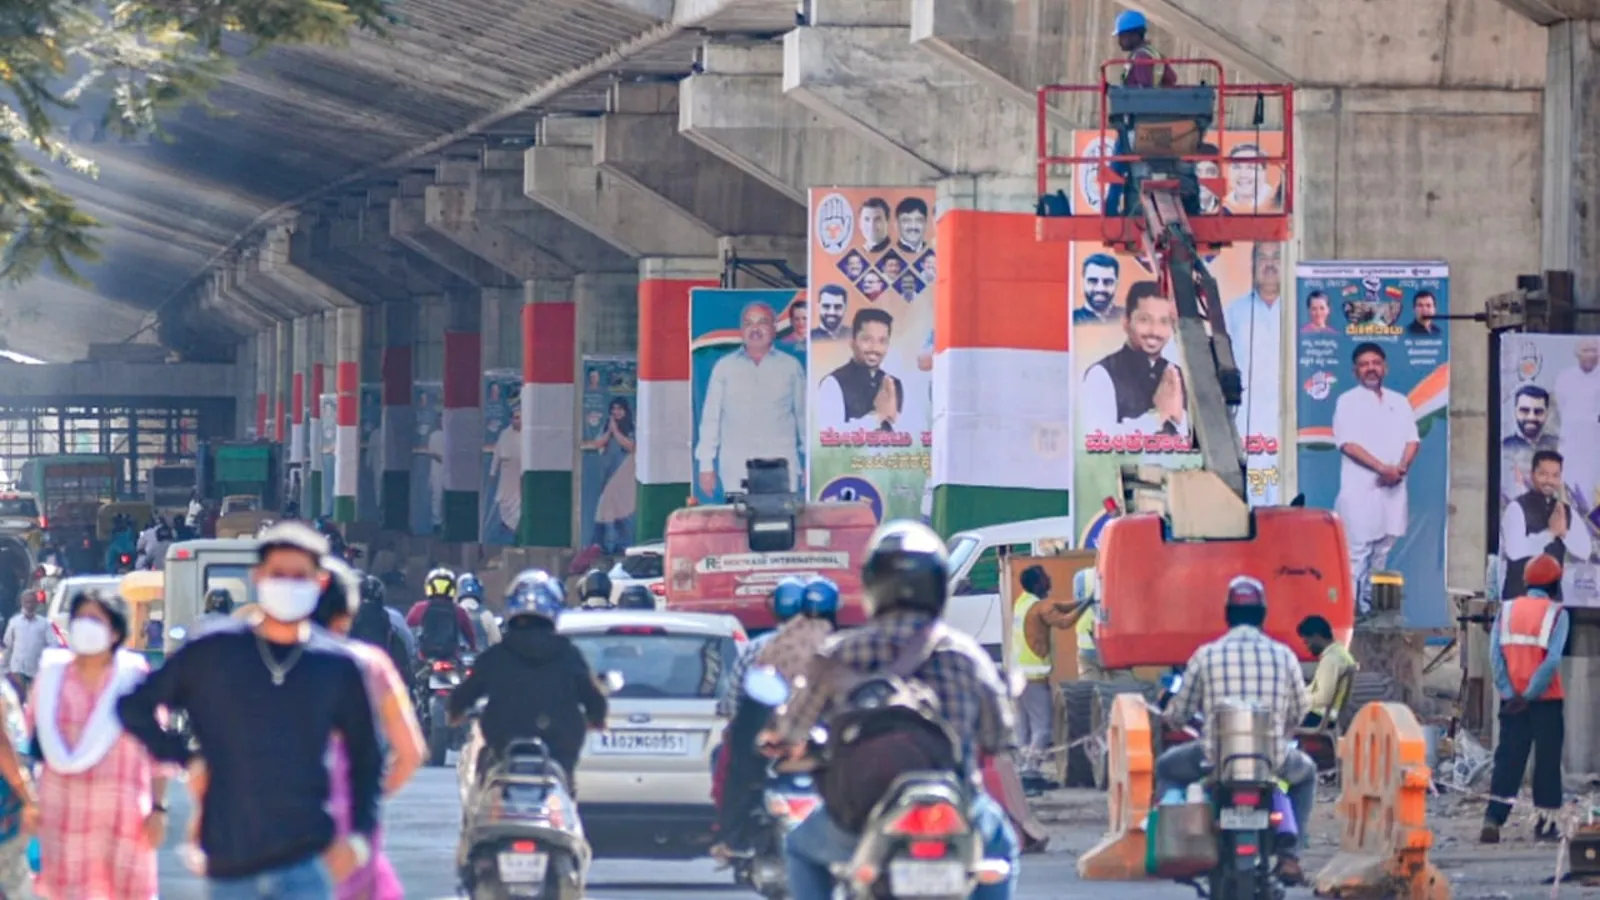 Is rule applicable only to Congress? Shivakumar slams BBMP over flex banners